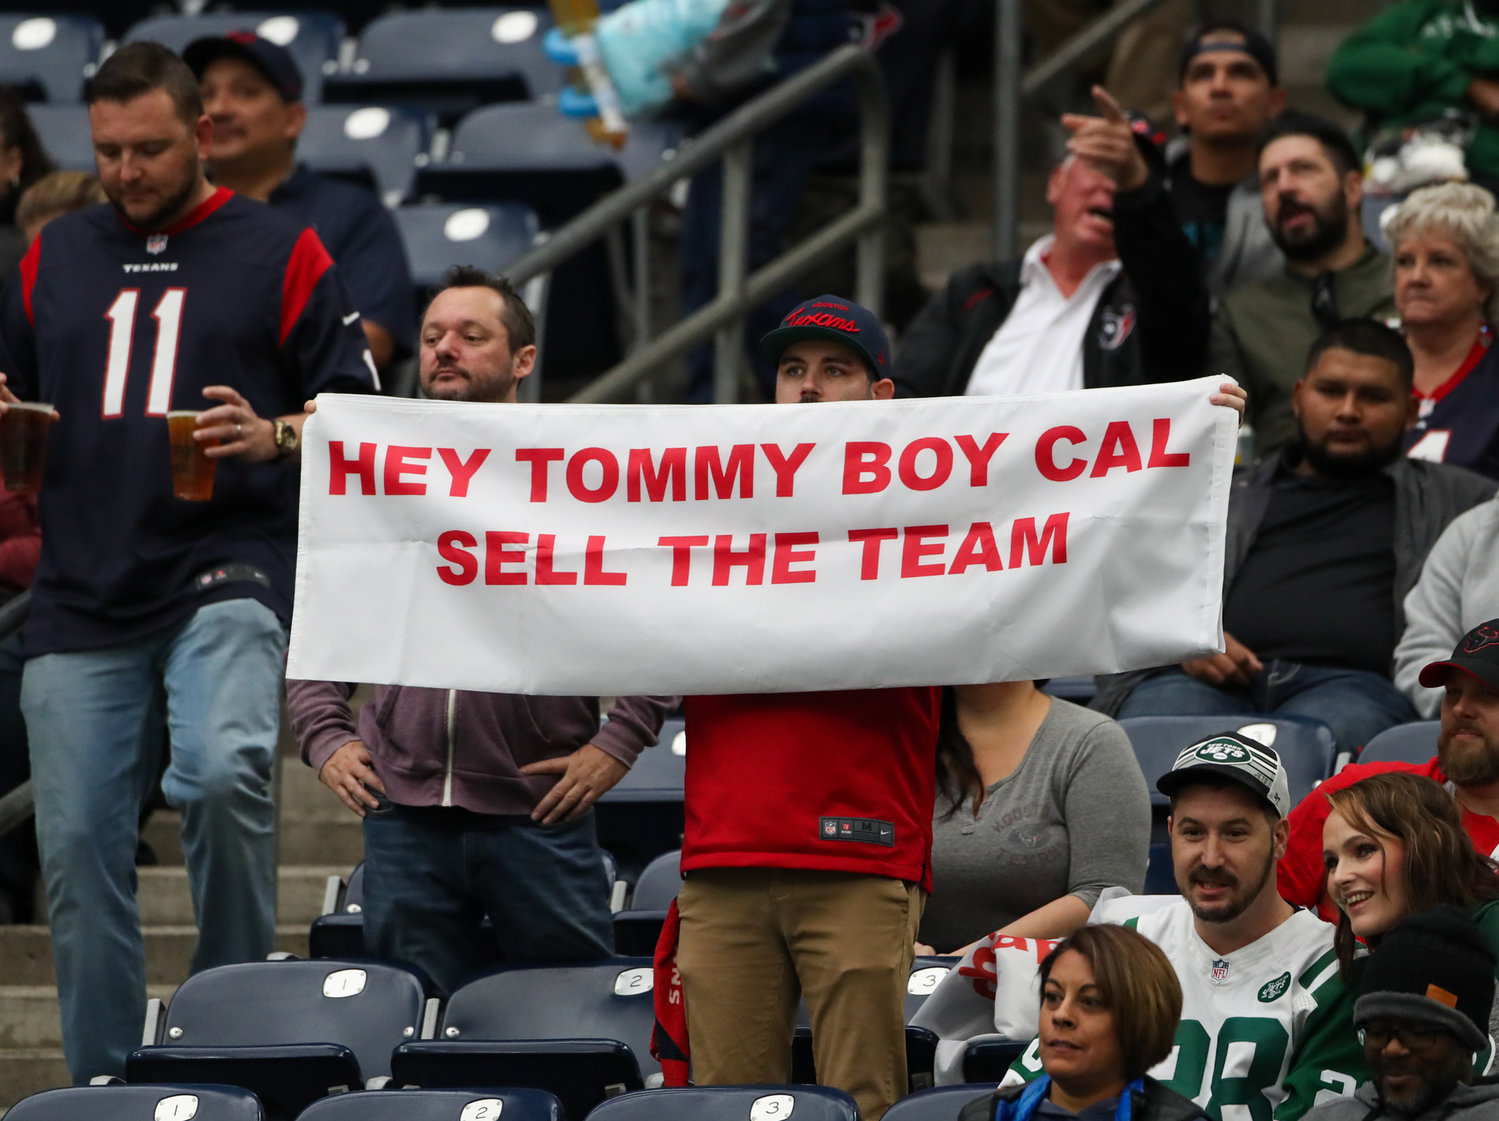 A Houston Texans fan holds up a sign about Houston Texans Chairman and Chief Executive Officer Cal McNair during an NFL game between the Houston Texans and the New York Jets on November 28, 2021 in Houston, Texas. The Jets won, 21-14